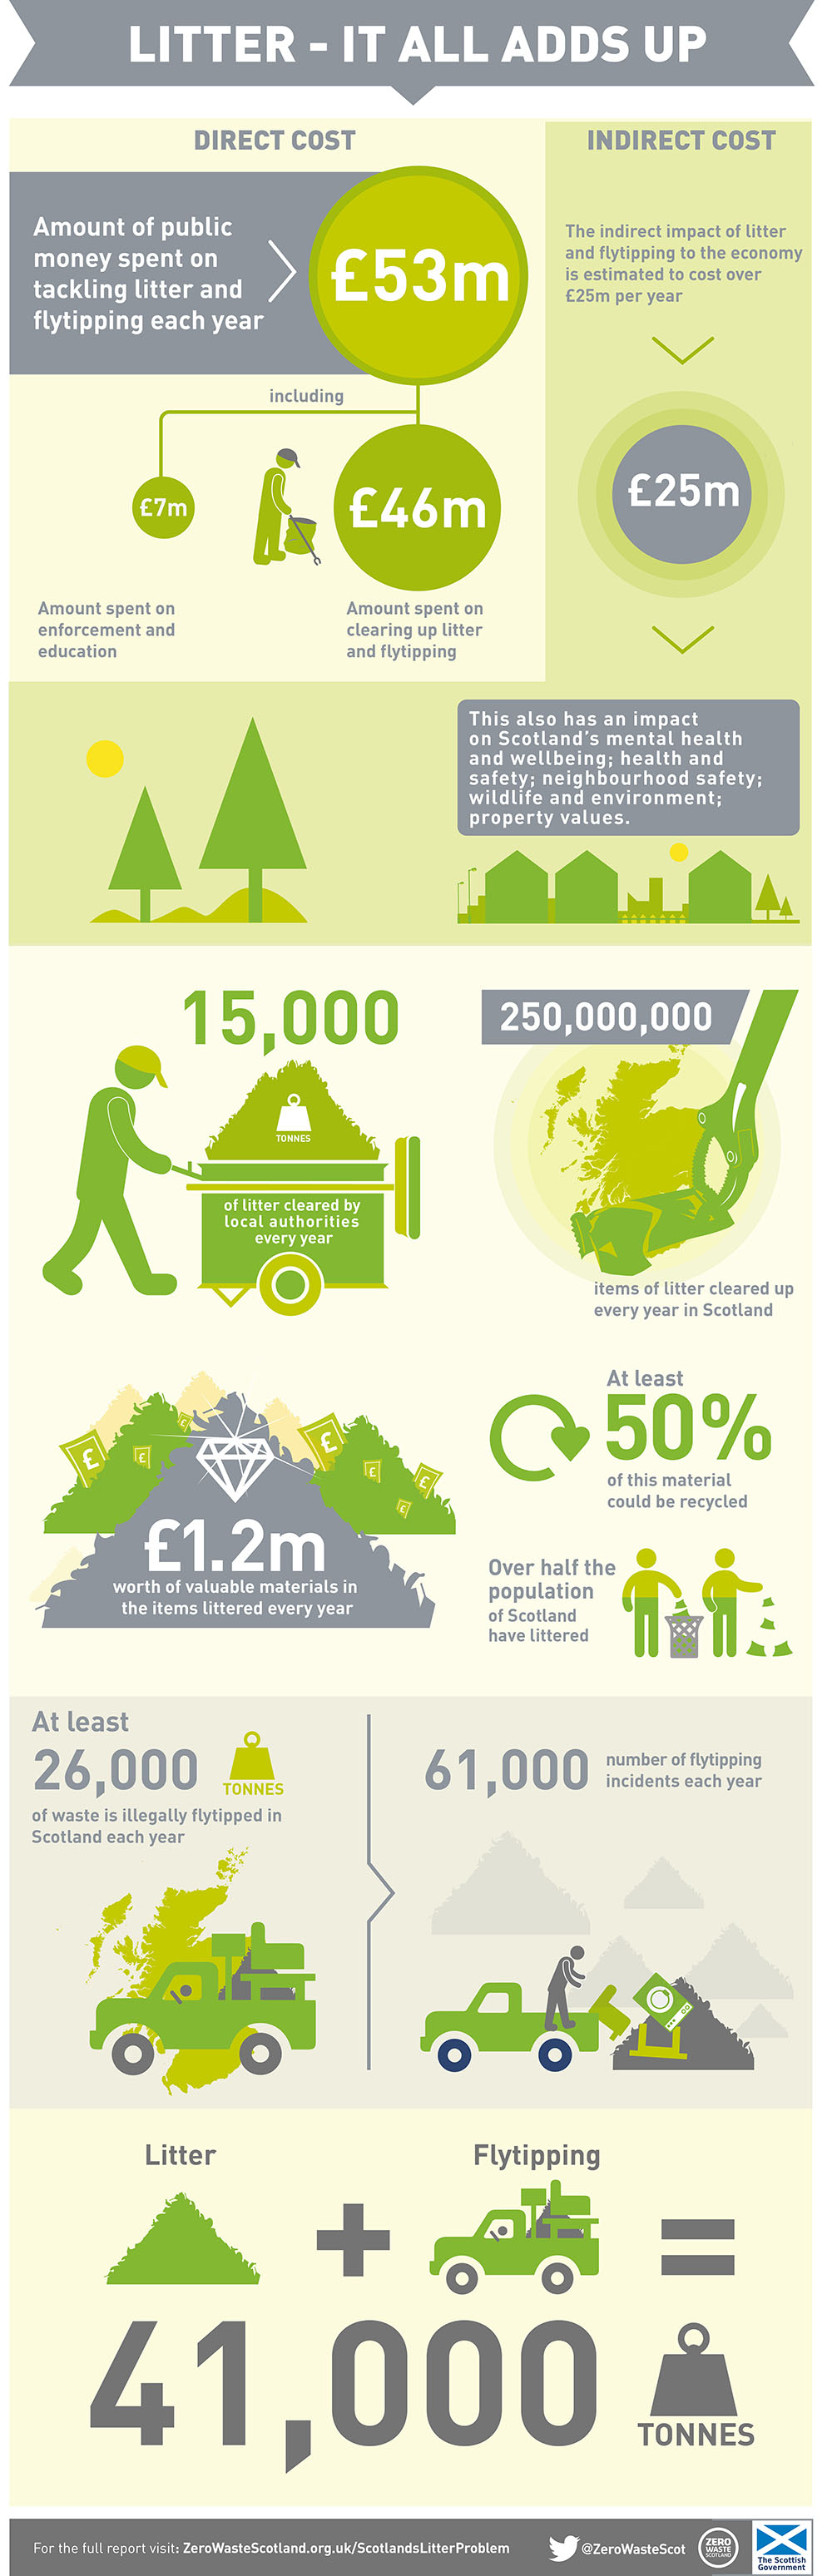 Litter infographic showing a summary of the reports findings